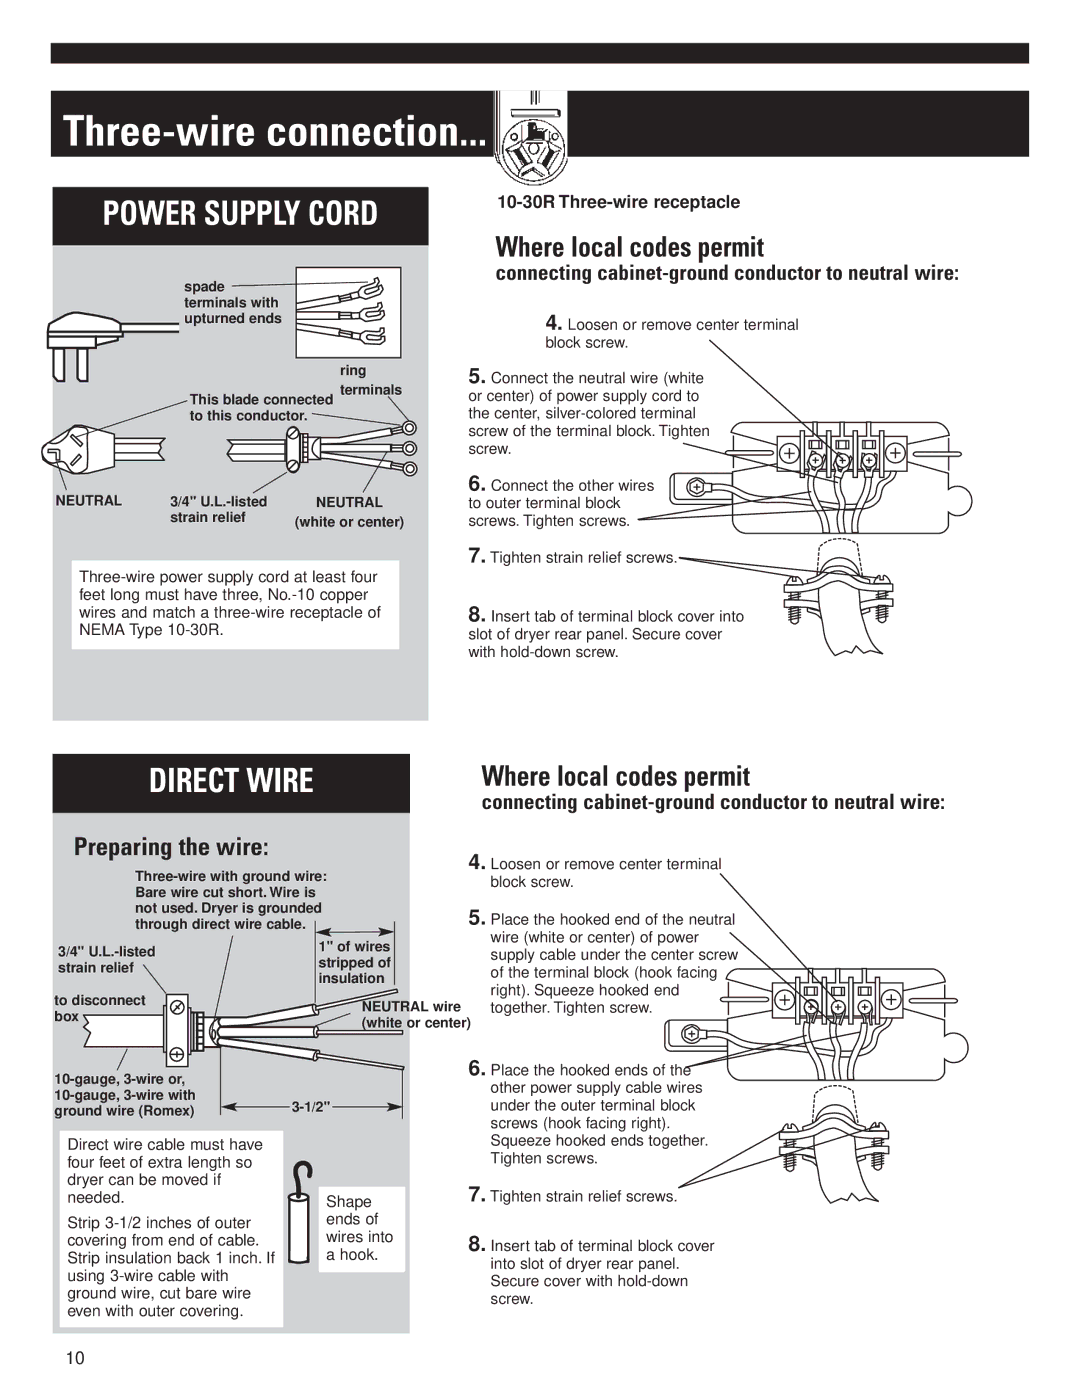 Whirlpool 8535840 installation instructions Three-wire connection, Where local codes permit, 10-30R Three-wire receptacle 